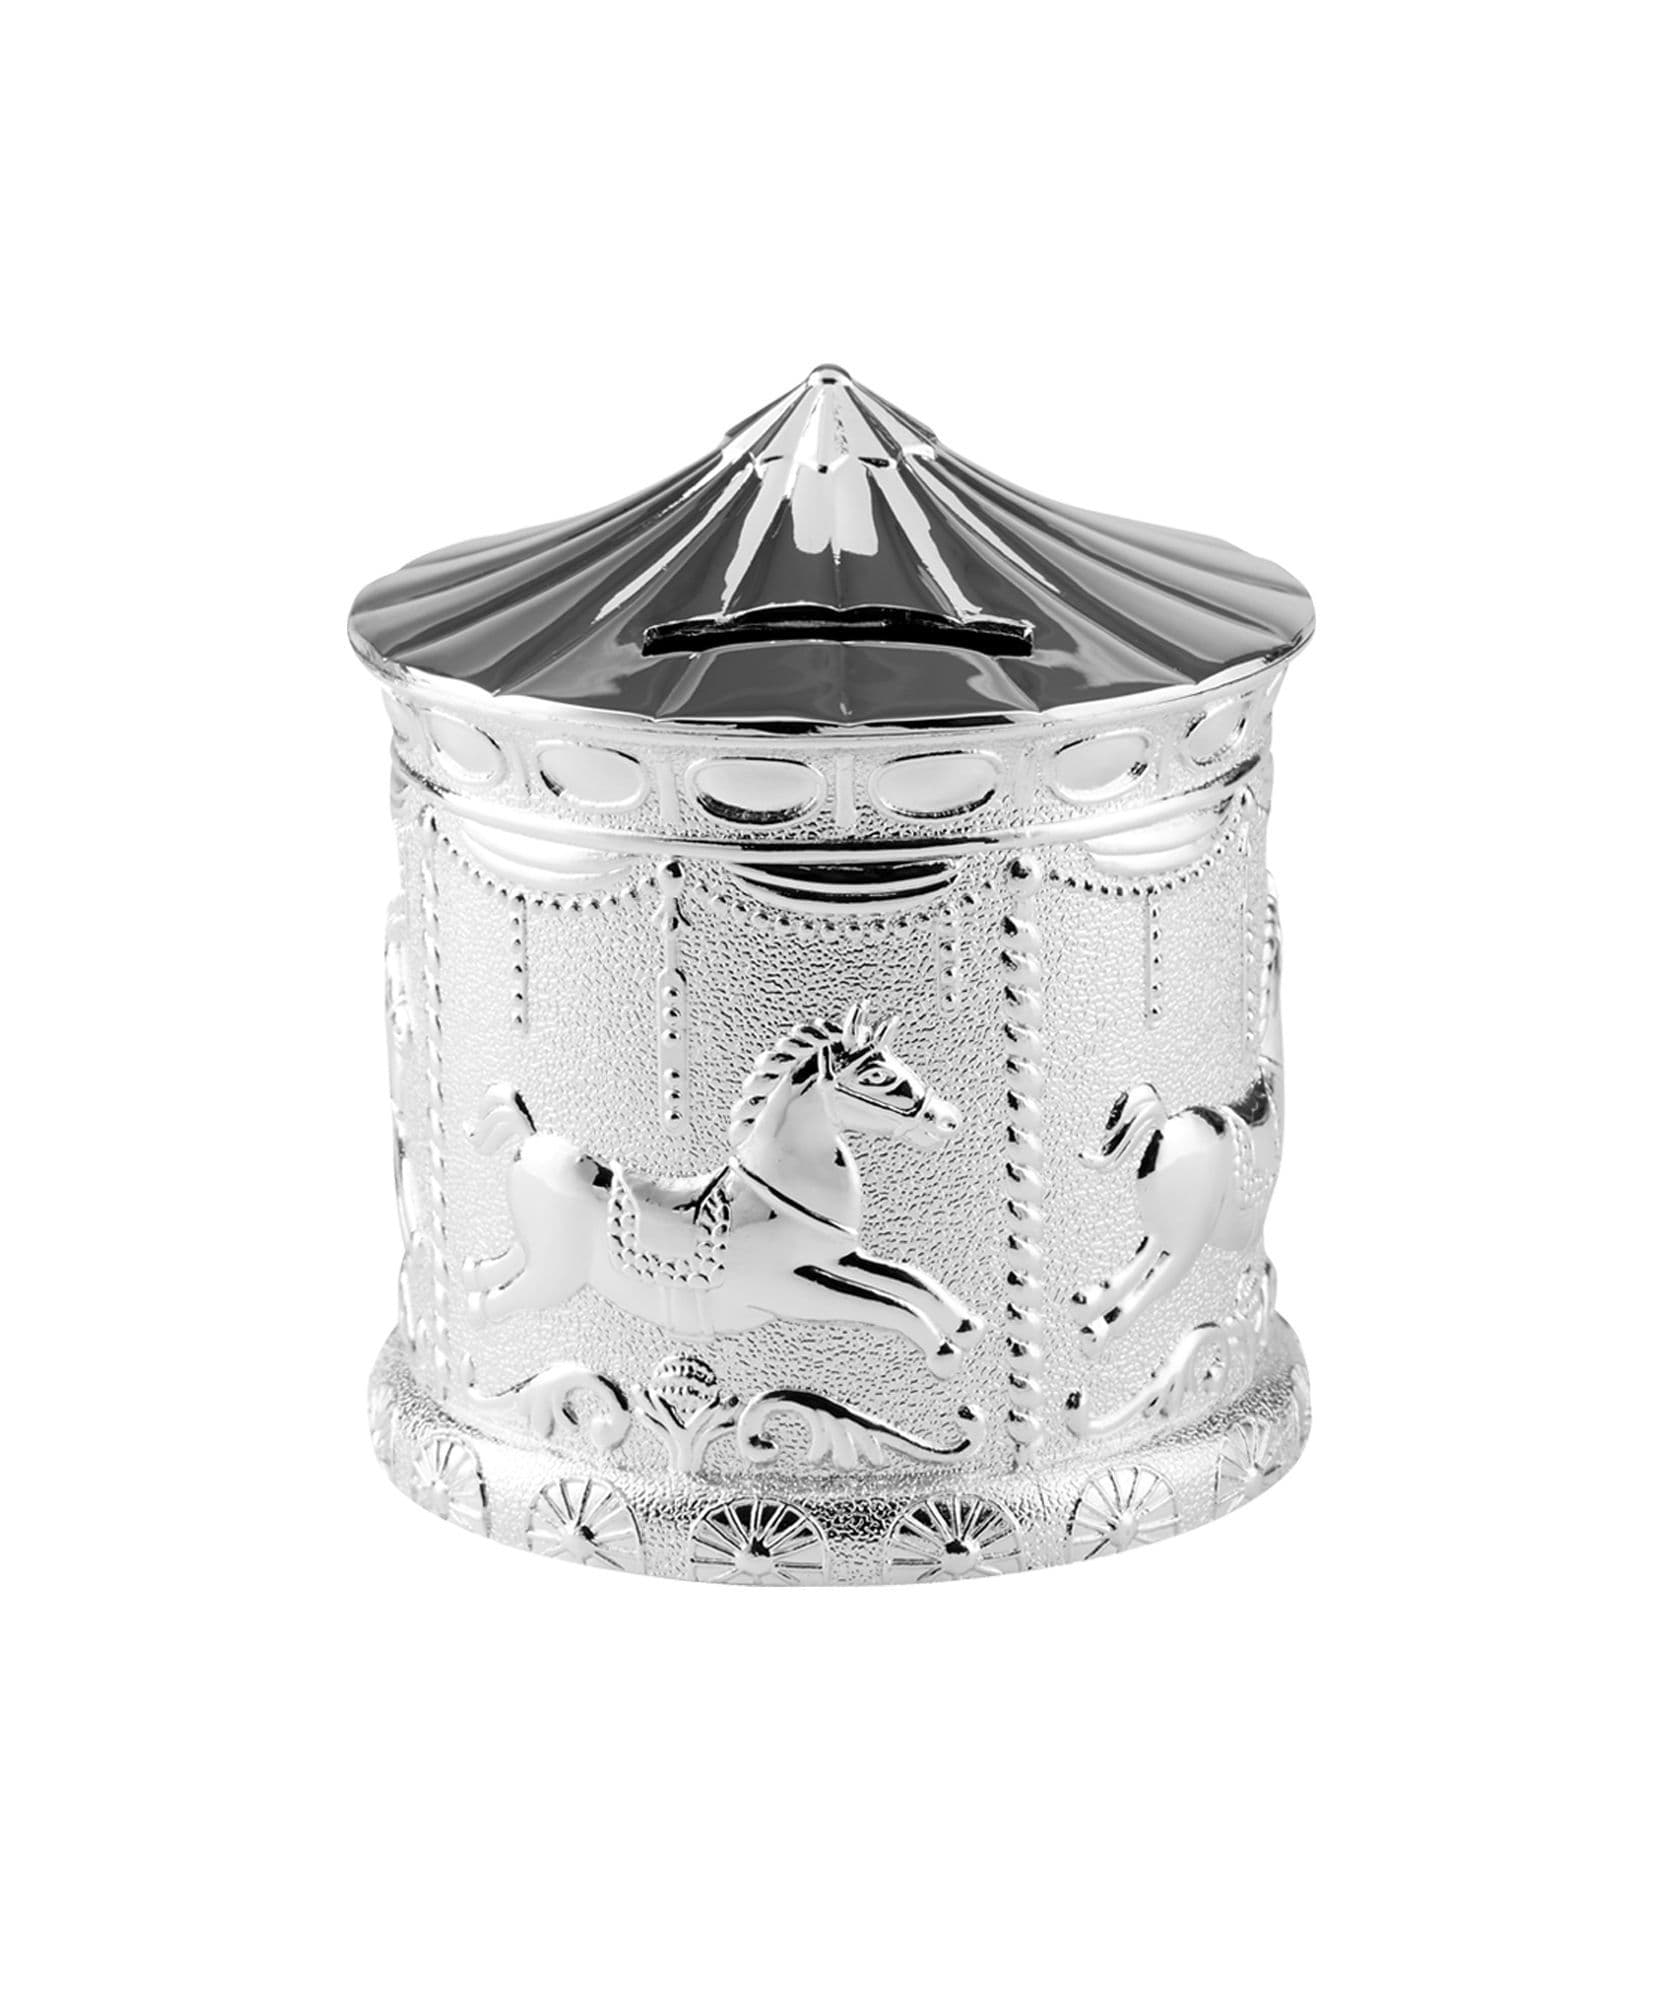 Silver Plated Carousel Money Box Christening Gift